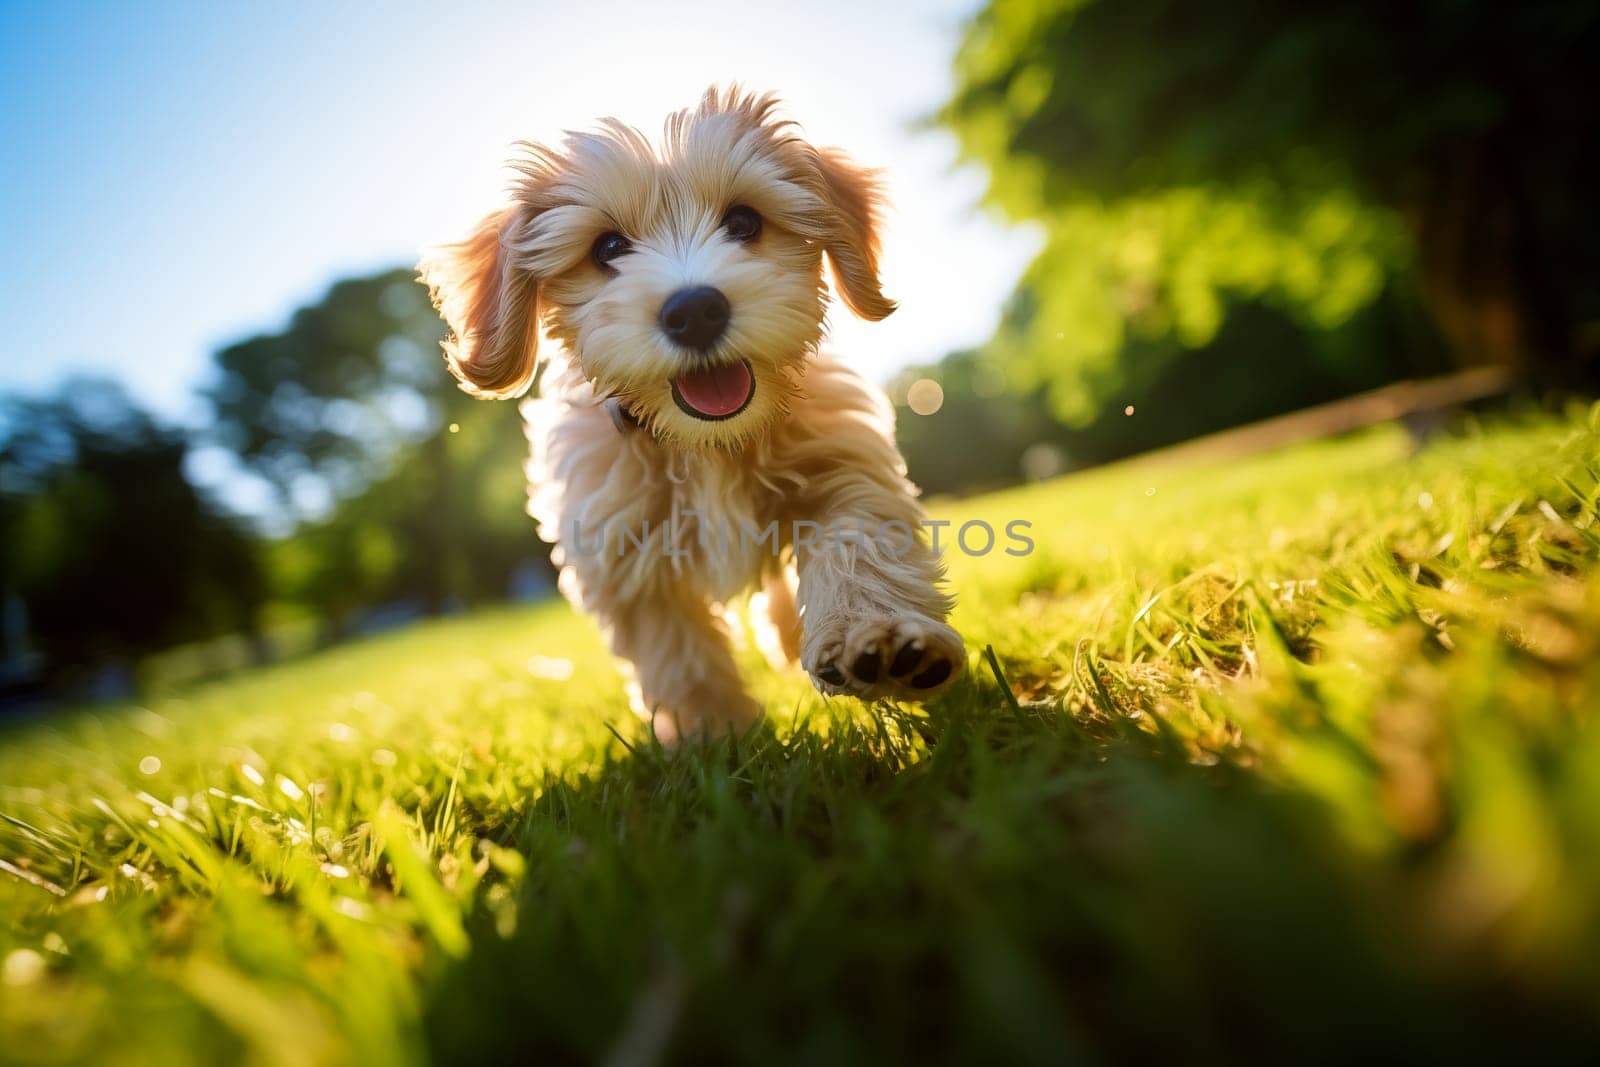 Joyful Puppy Playing Outdoors in Sunny Weather by dimol